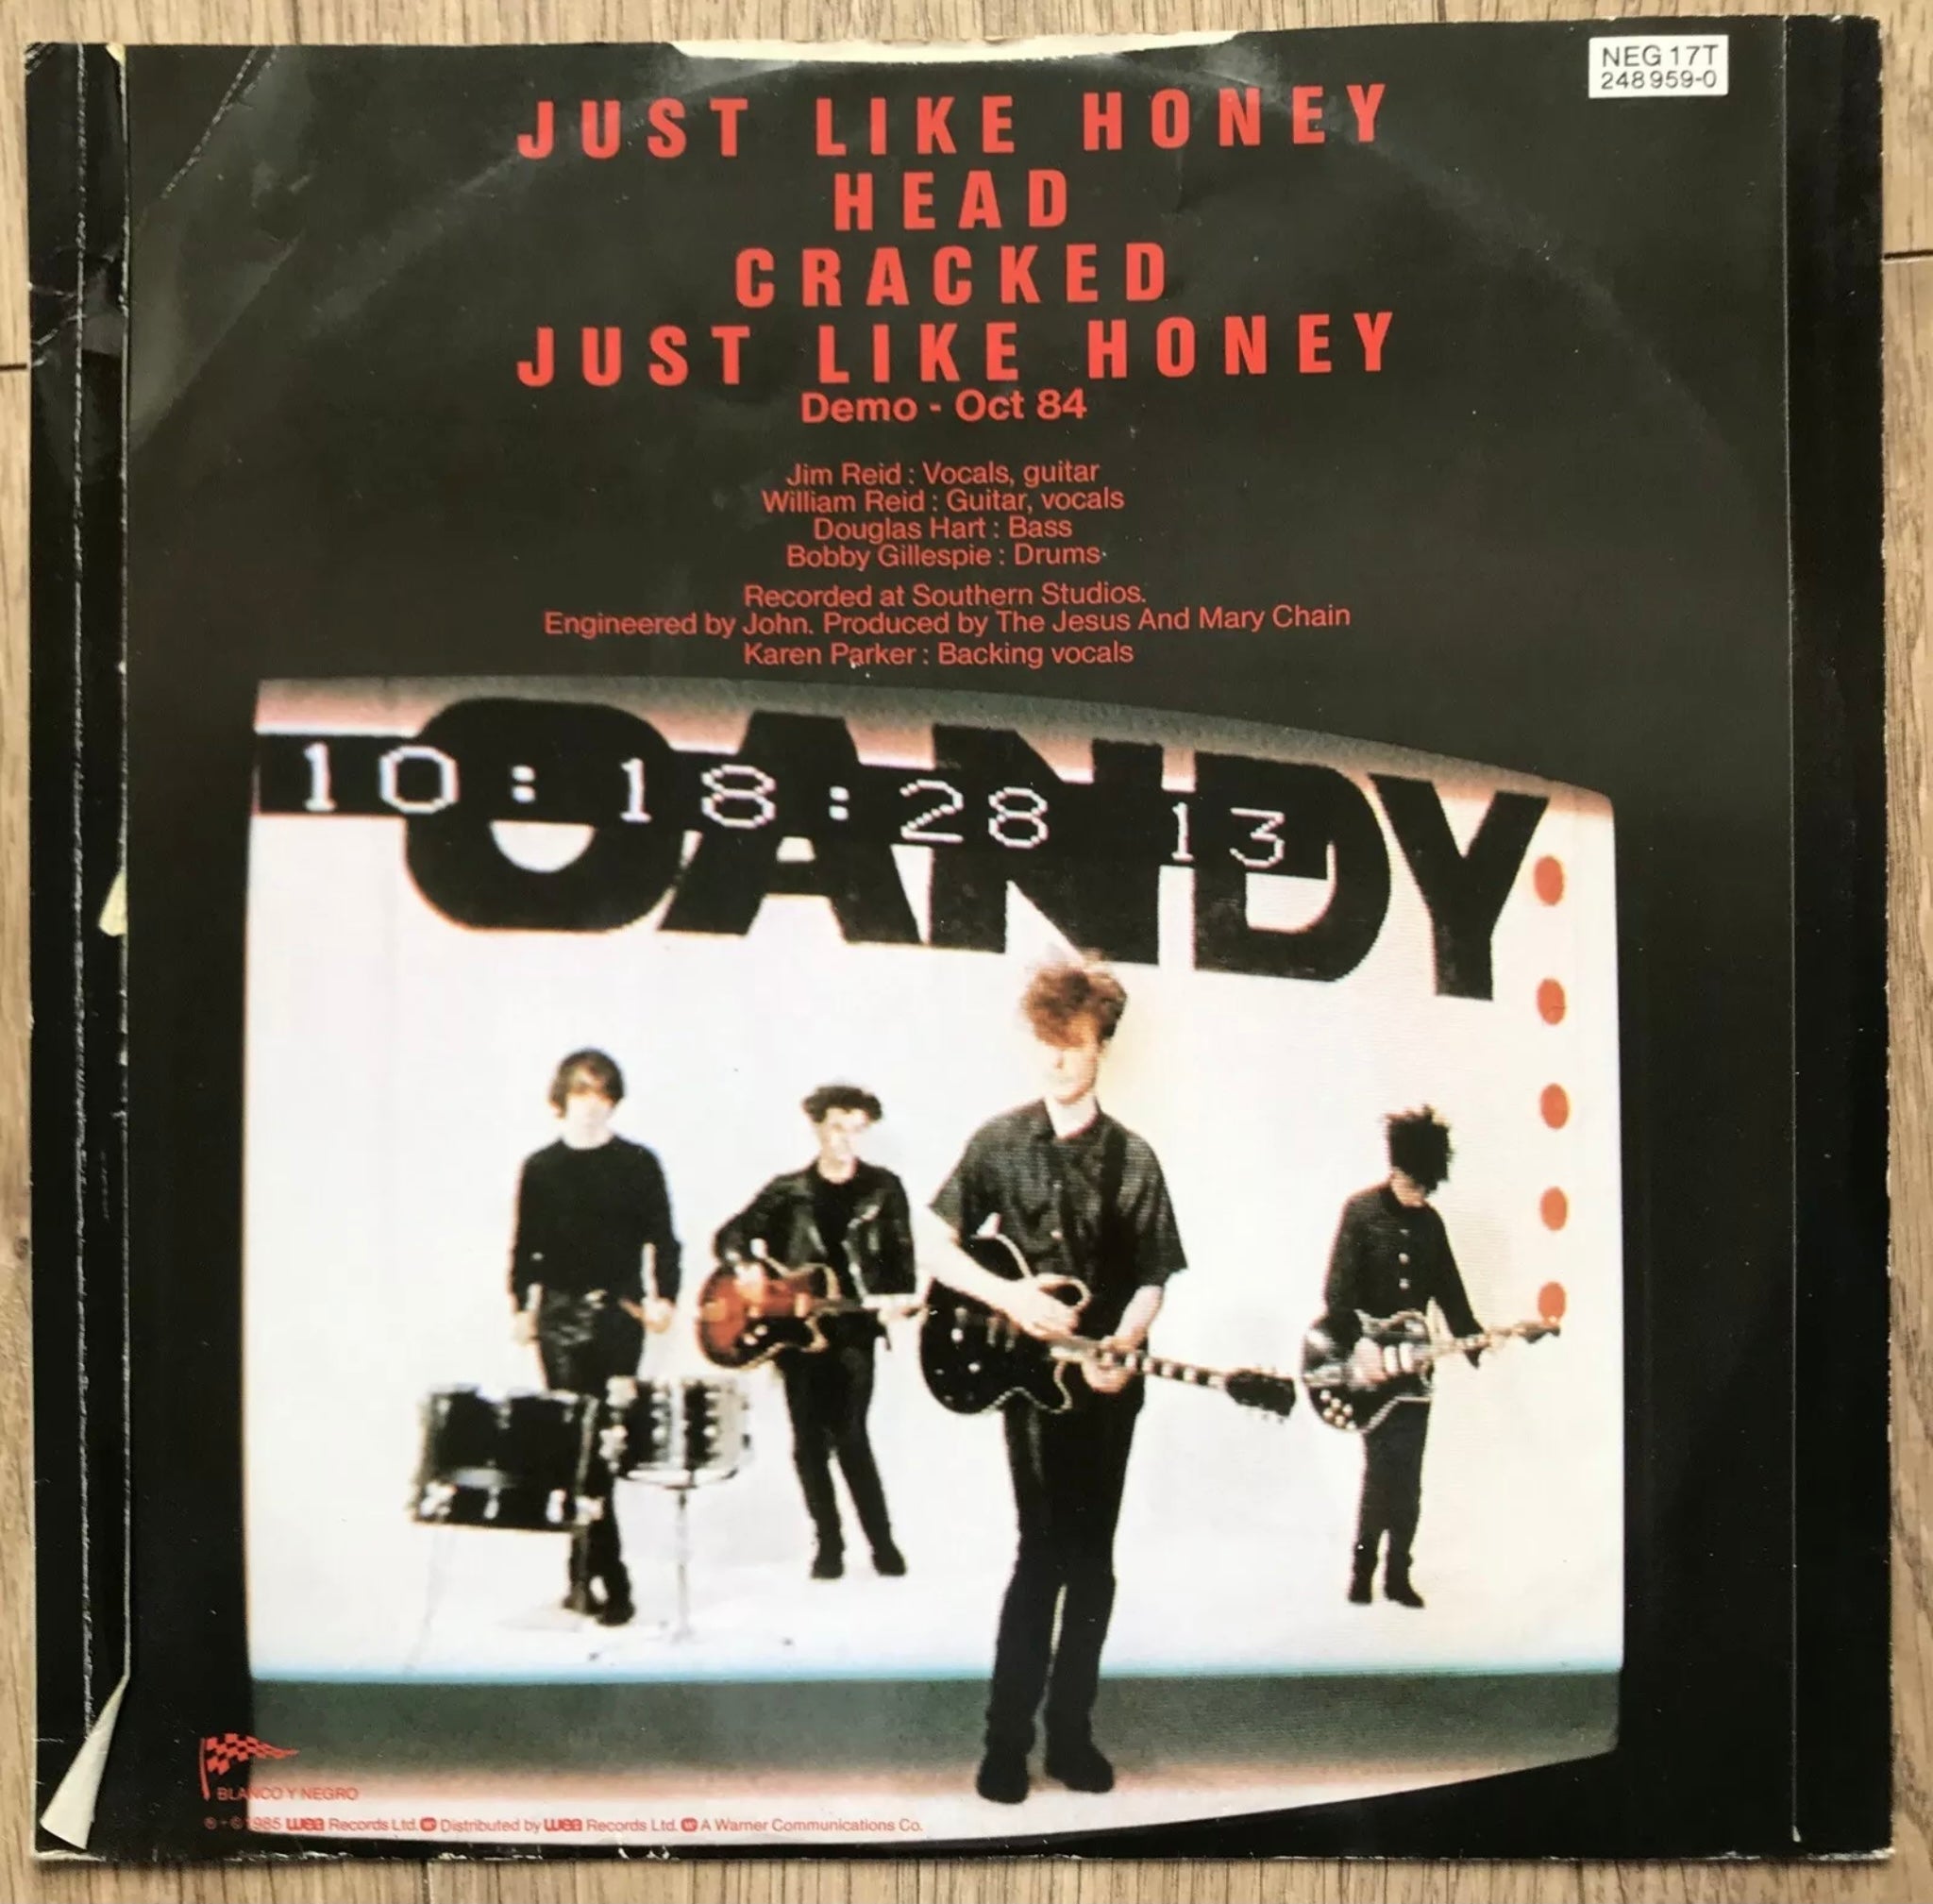 THE JESUS & MARY CHAIN “JUST LIKE HONEY” 1462 EX/EX RECORD 12